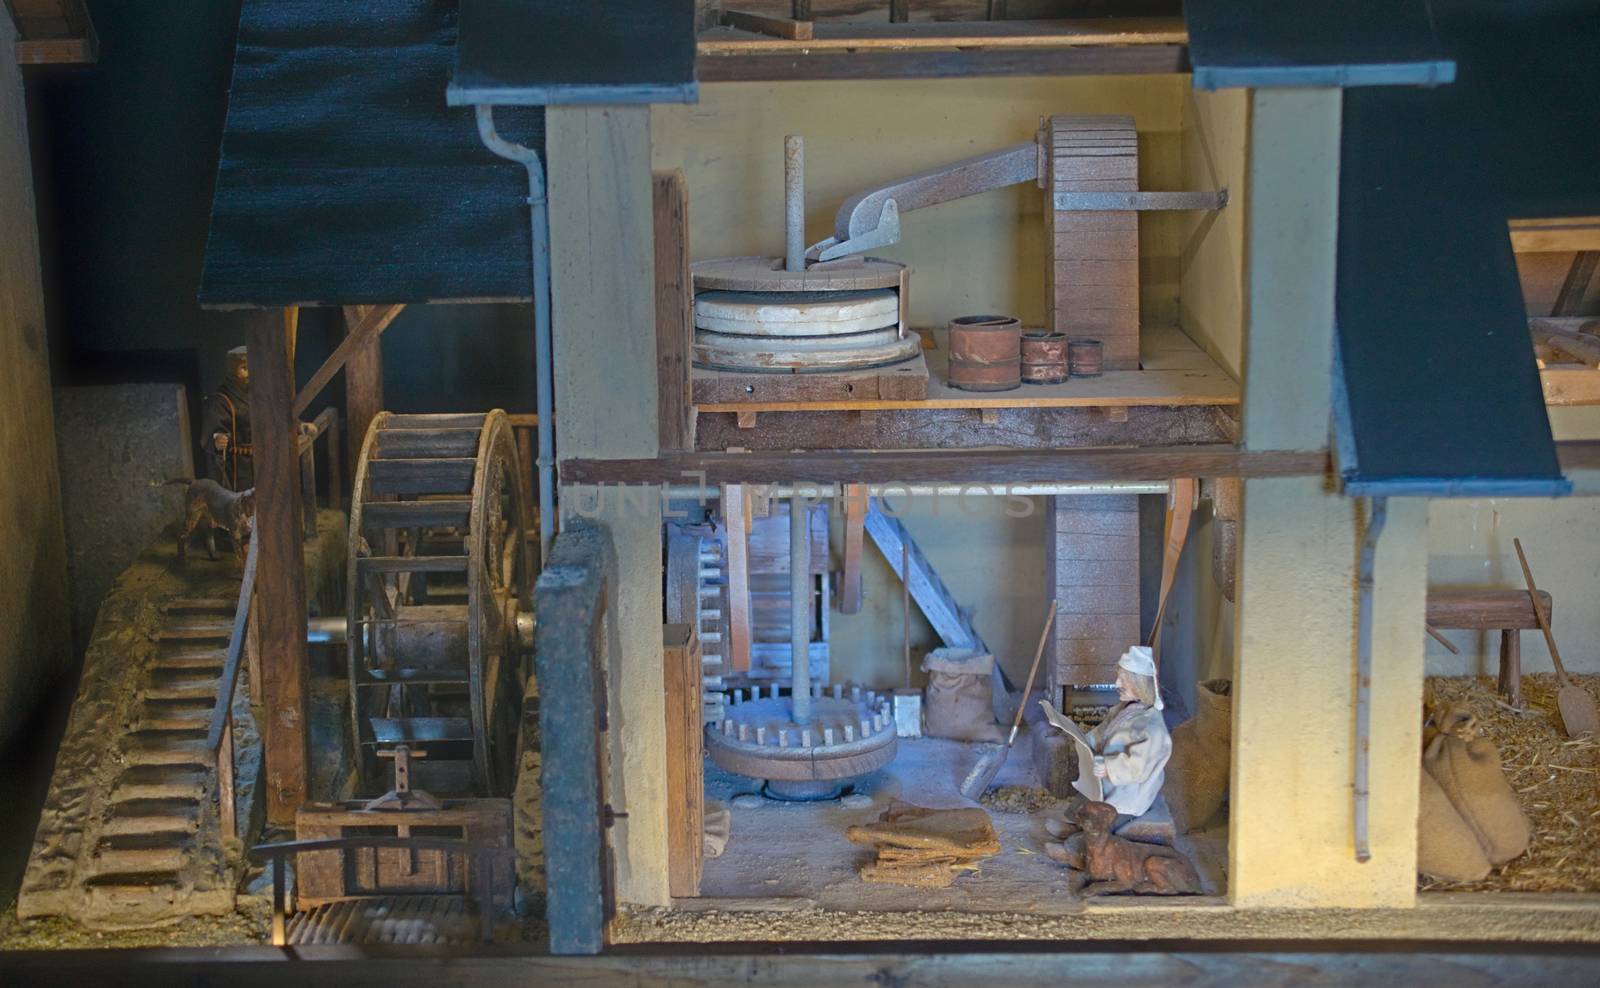 Small scale representation of a work in an old mill by sheriffkule